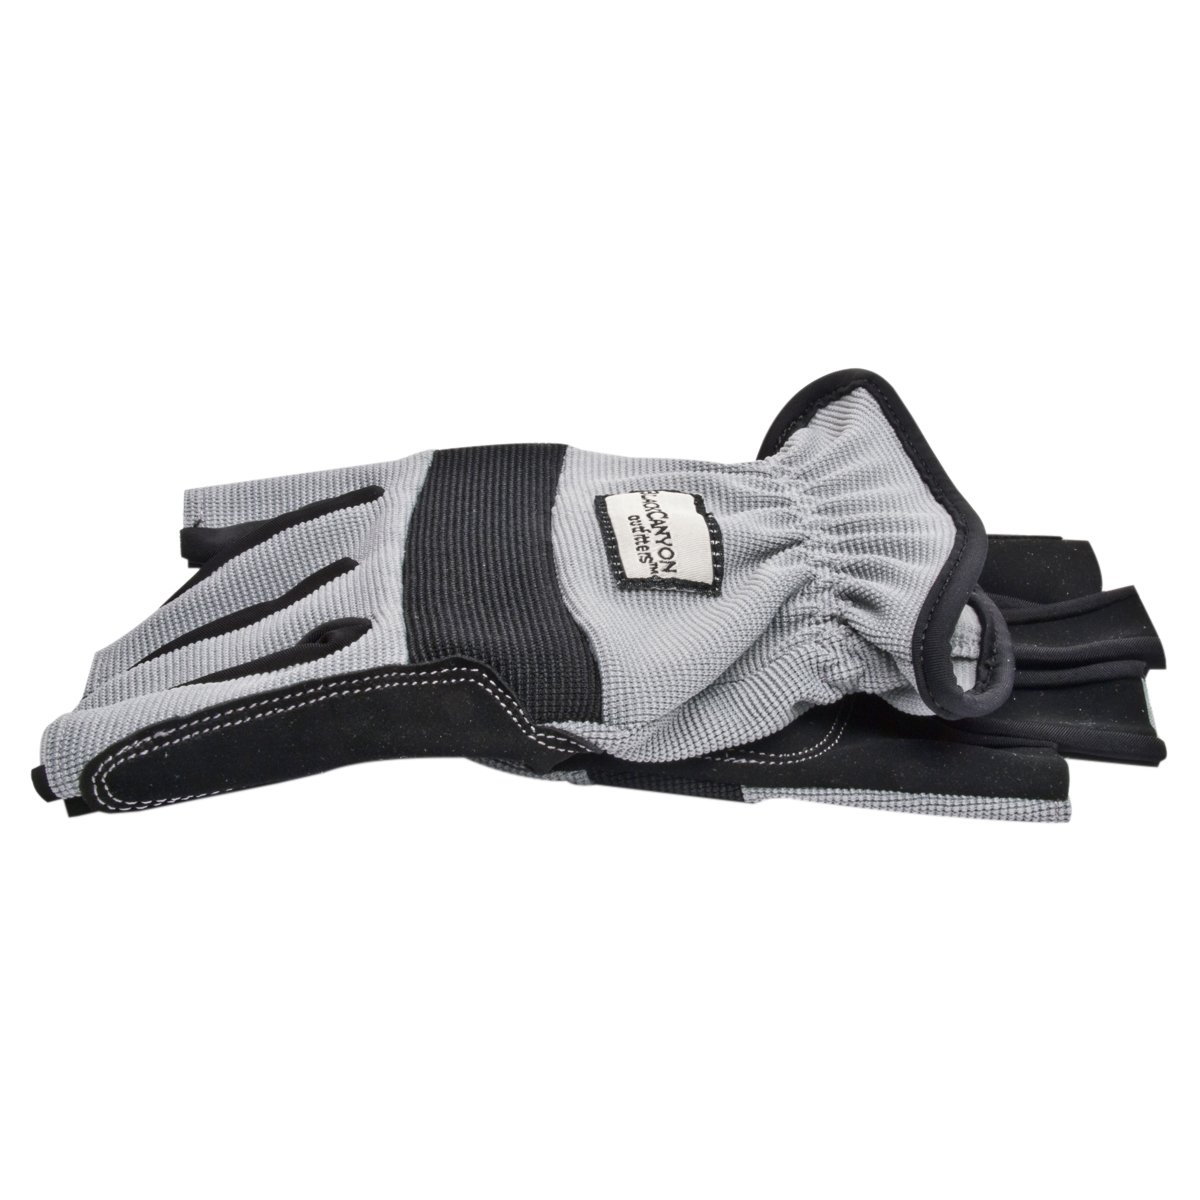 BlackCanyon Outfitters Large, High-Dexterity Fingerless Gloves, Grey